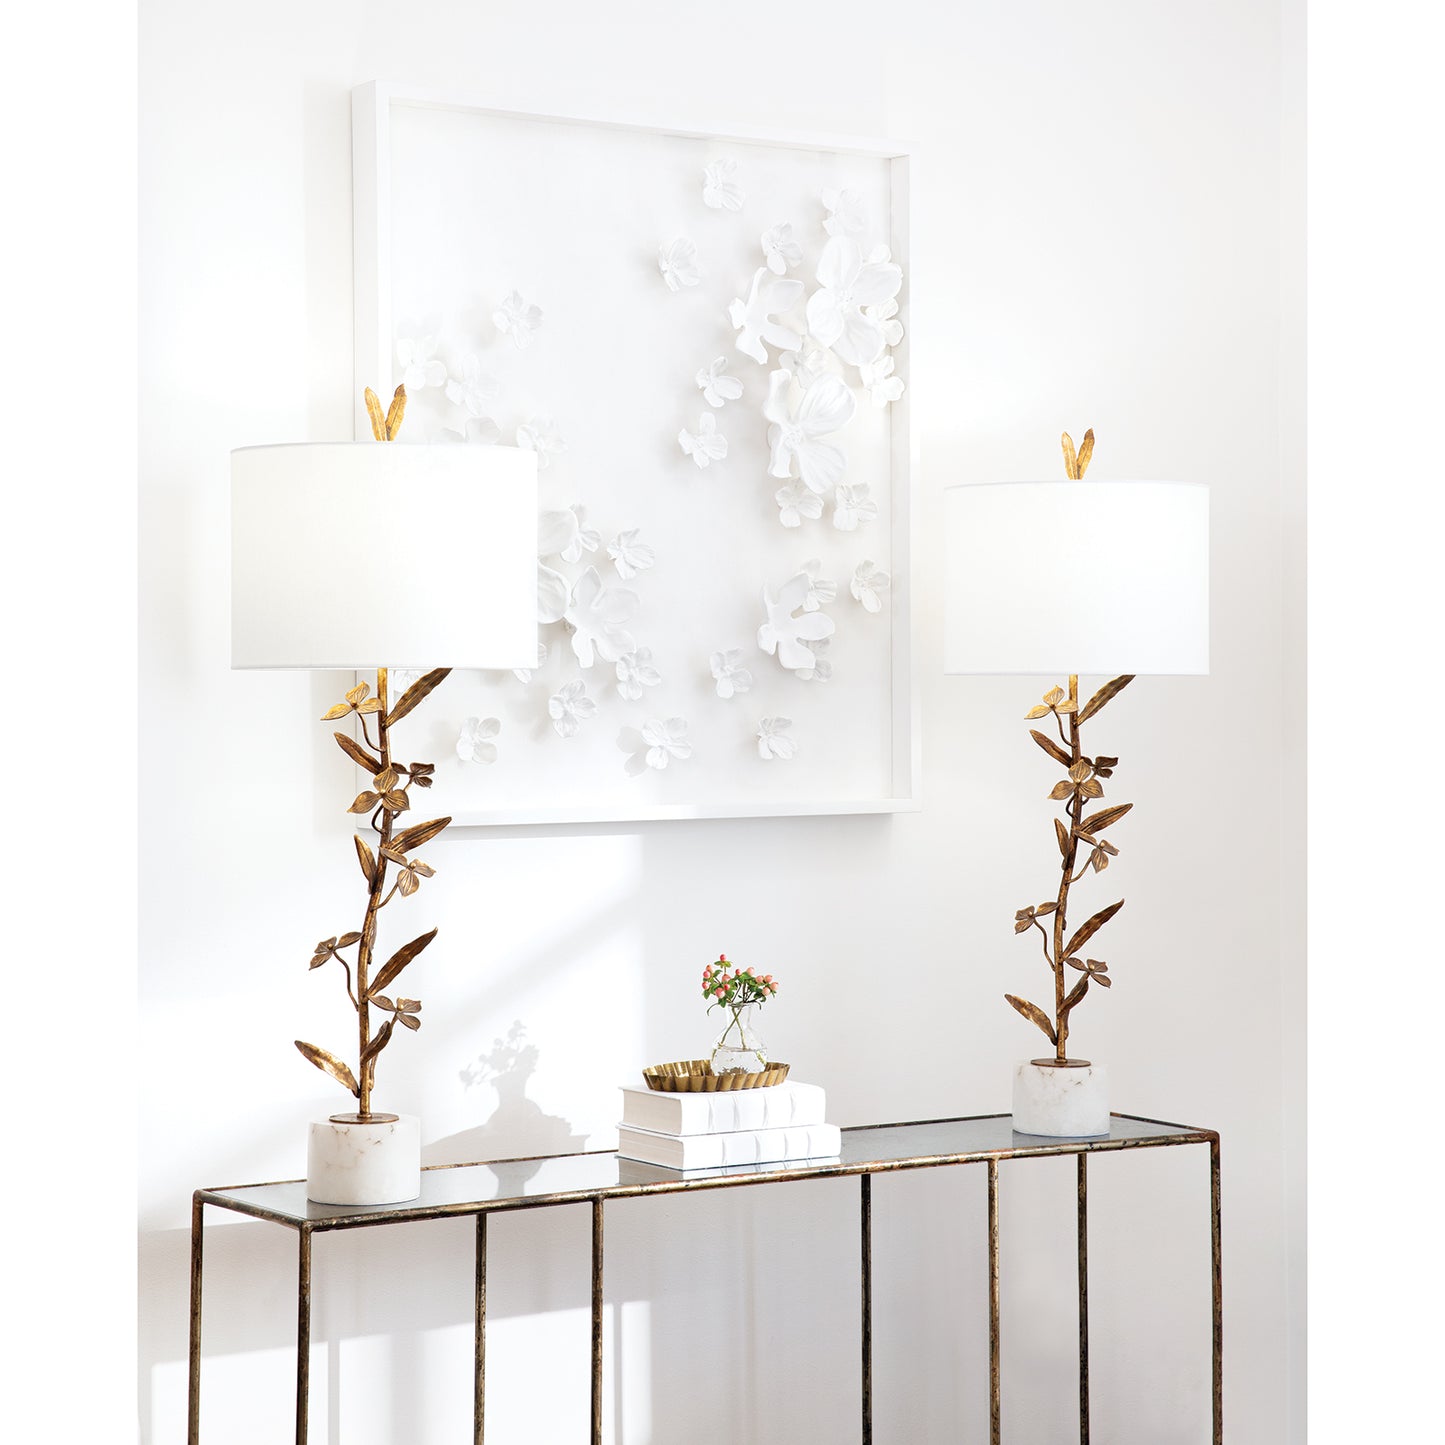 Trillium Buffet Lamp by Southern Living